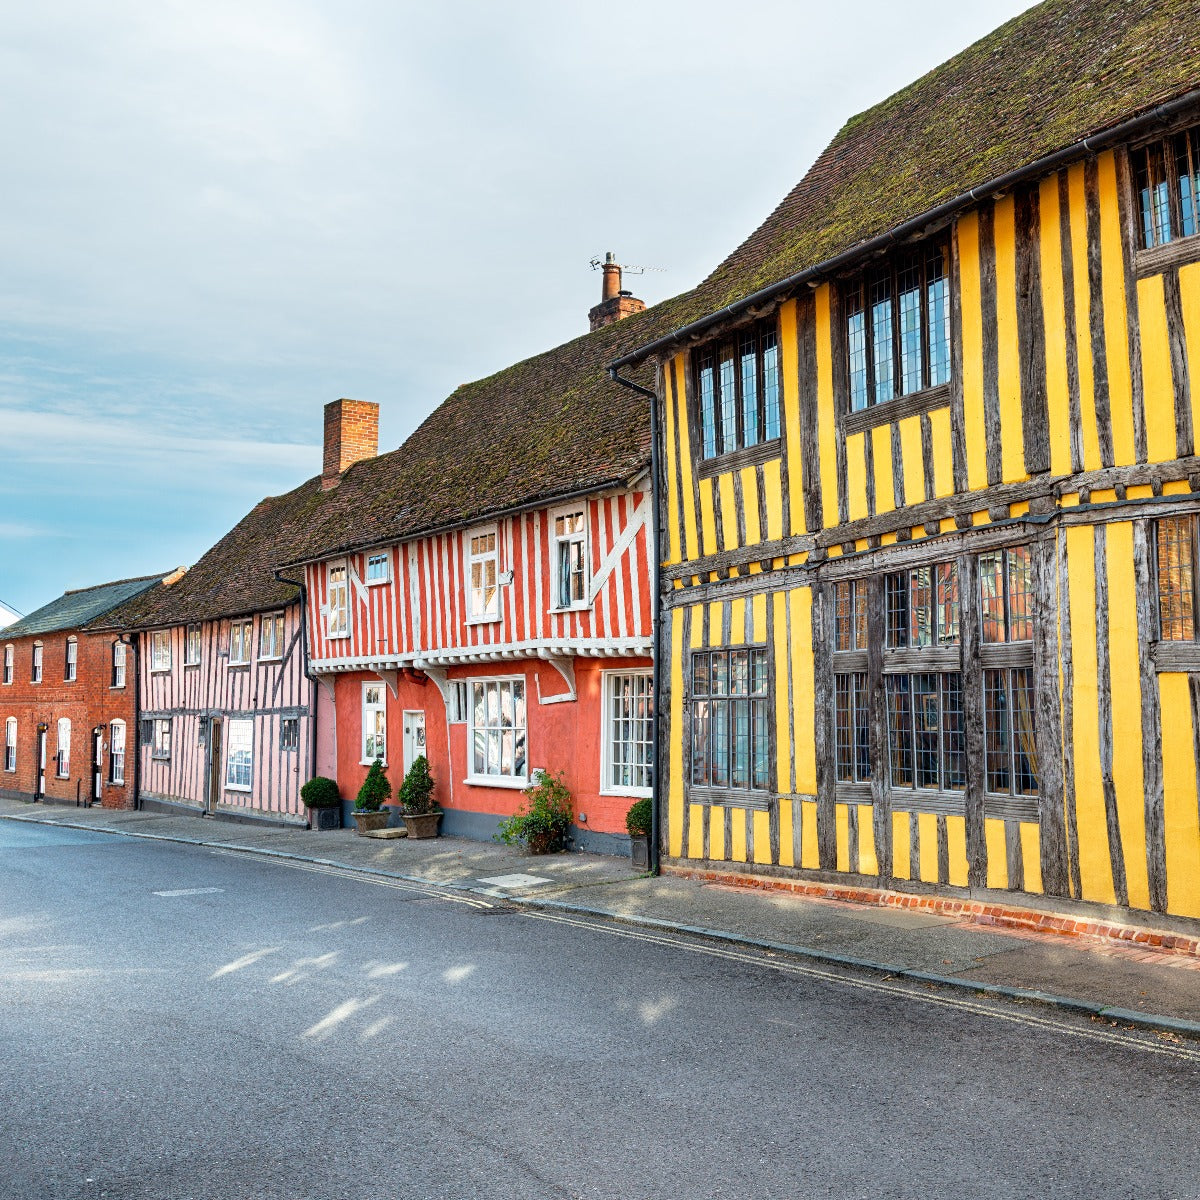 Colourful medieval houses in Lavenham